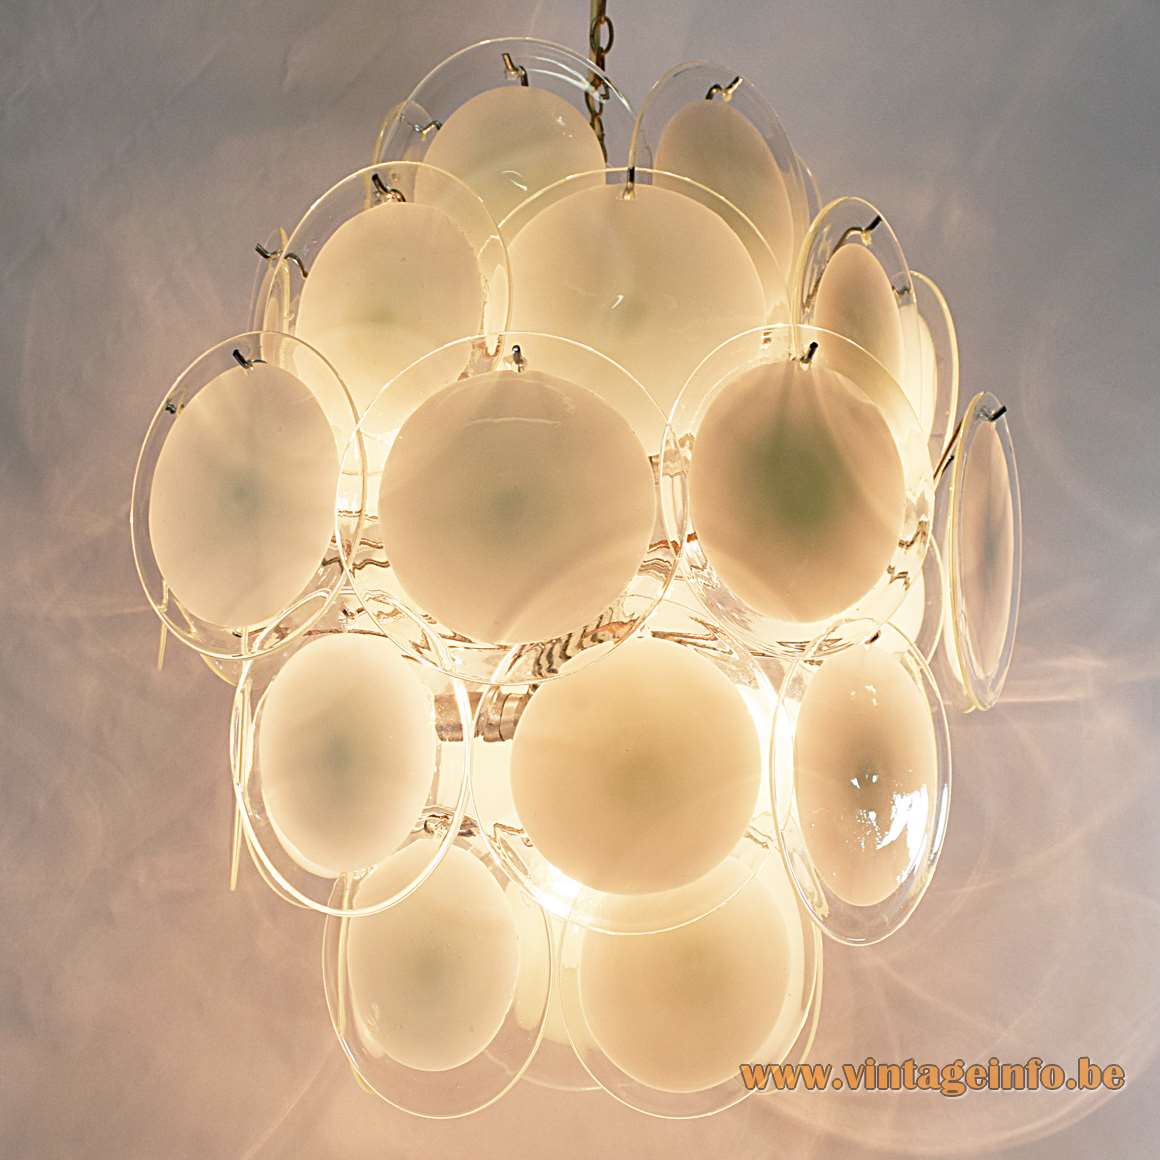 Gino Vistosi Multicoloured Discs Chandelier - Other model with white and translucent discs